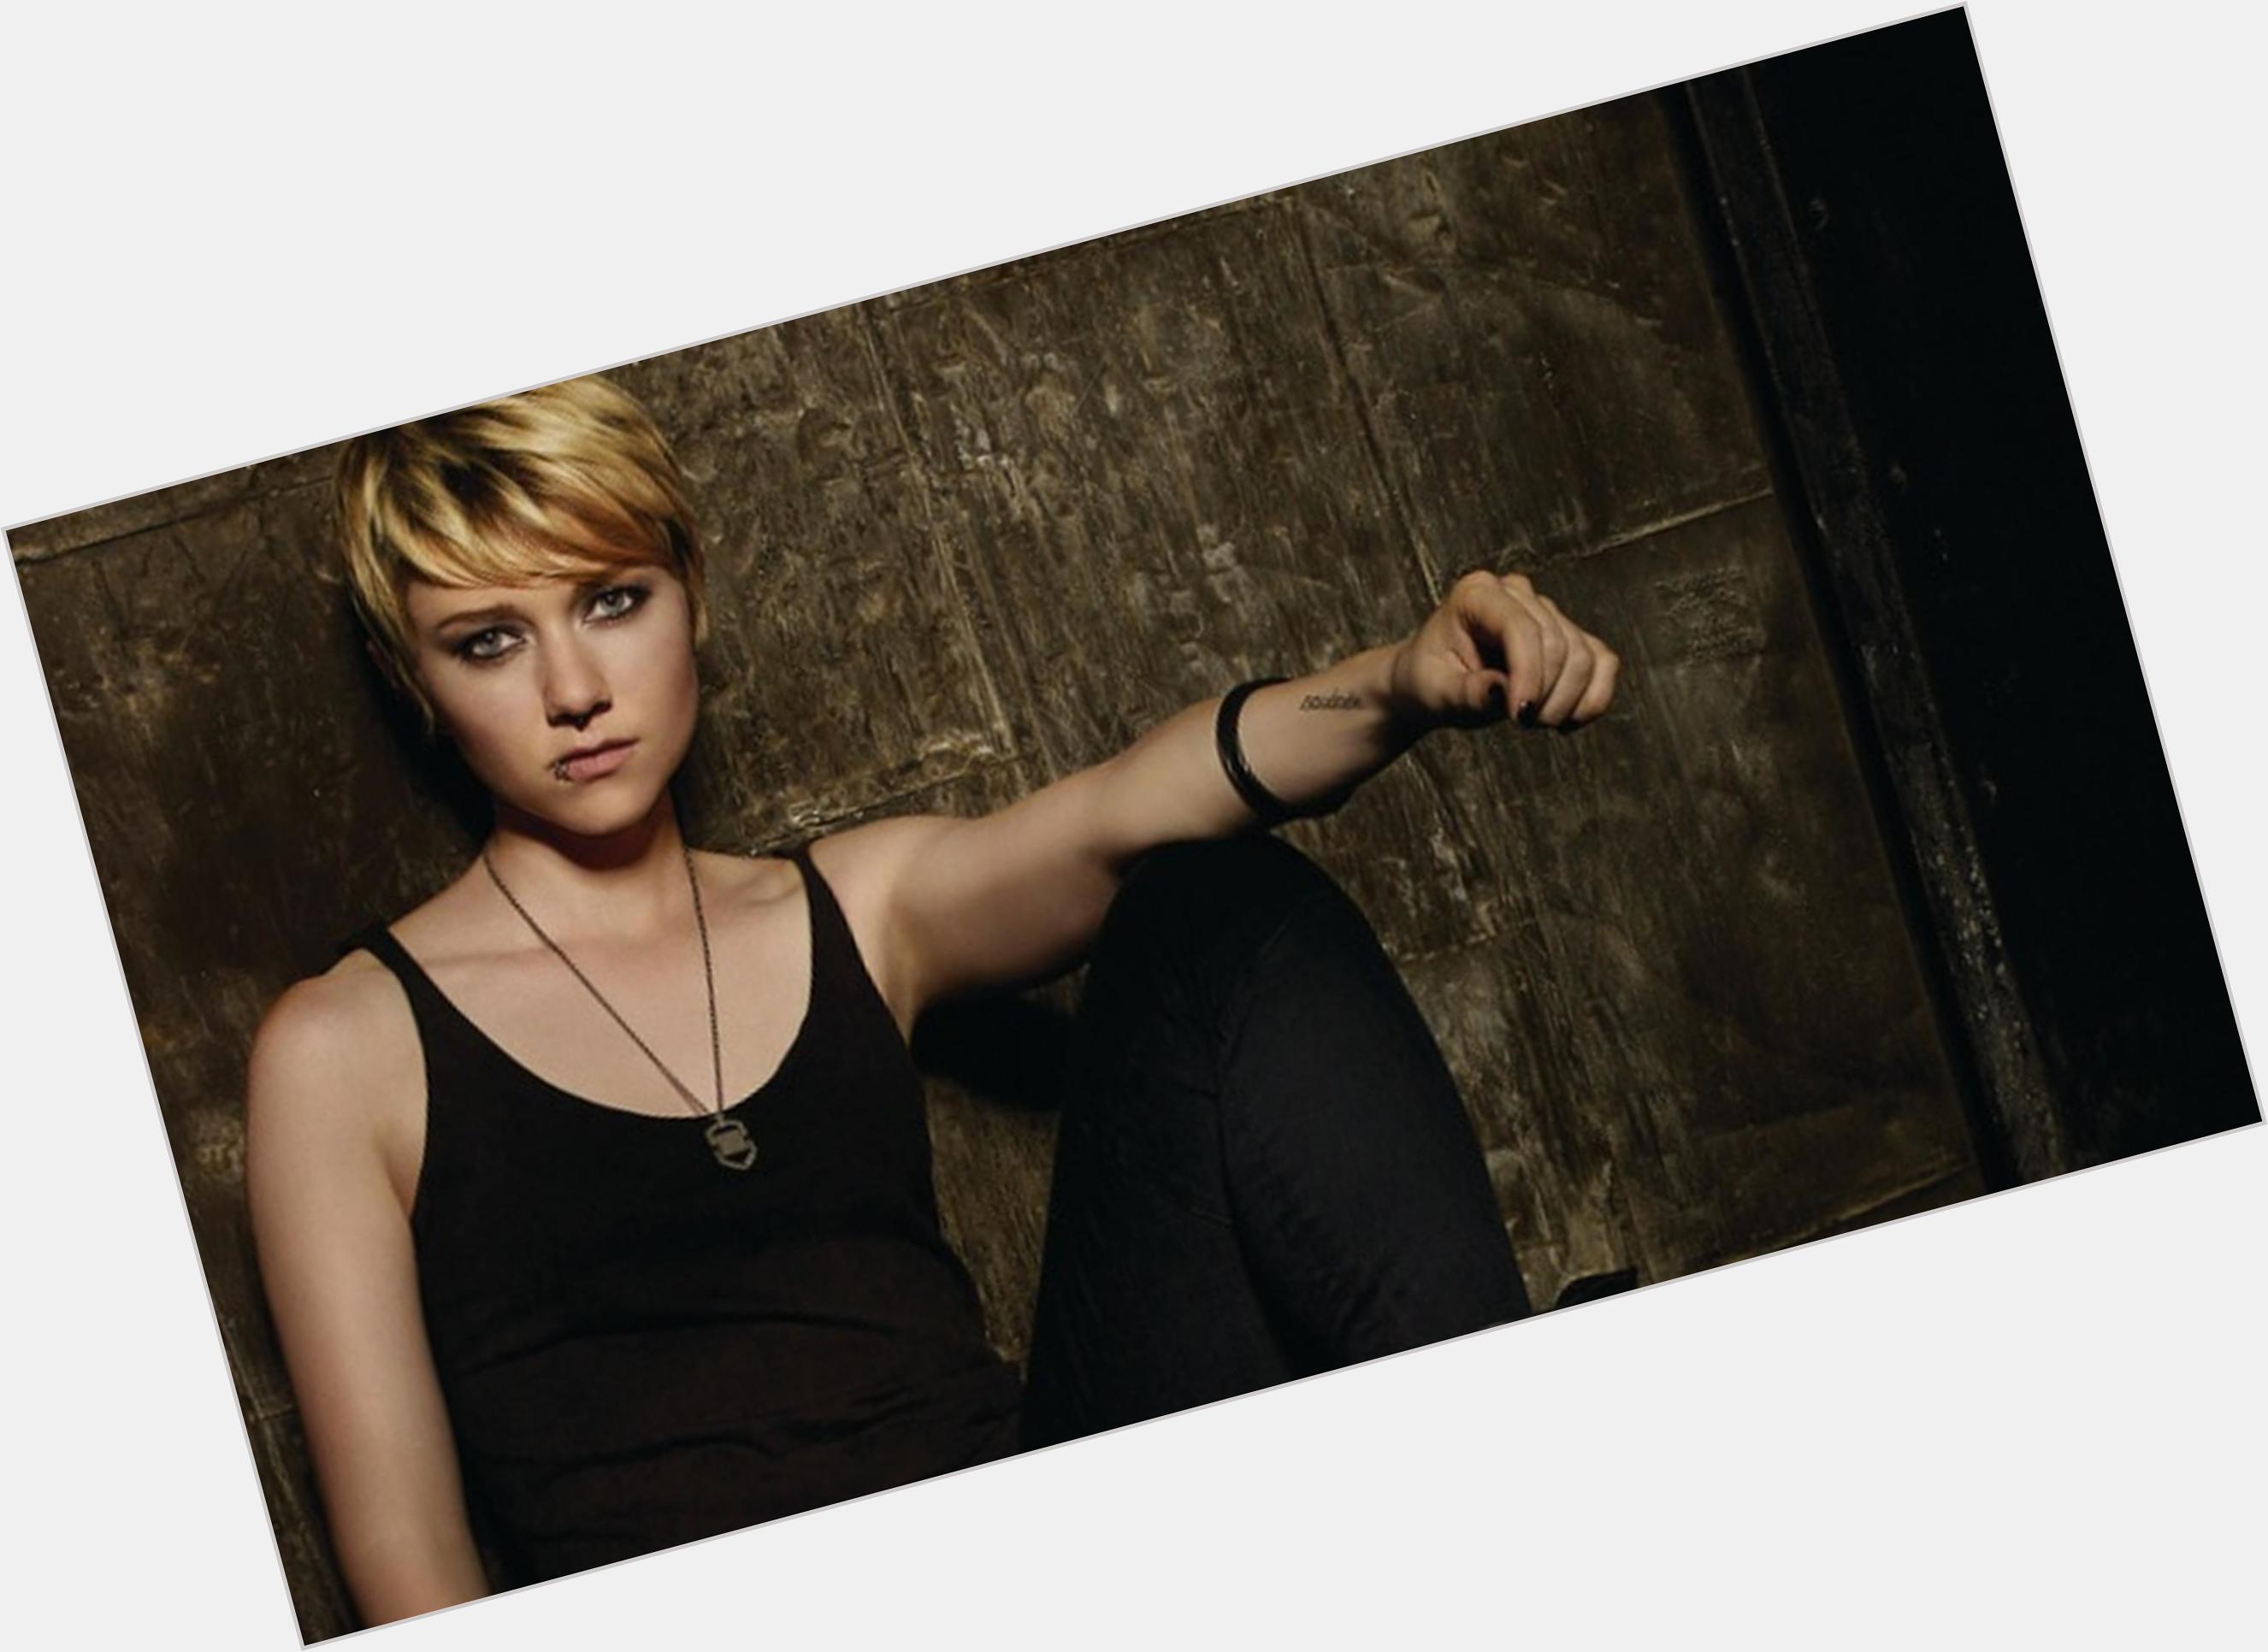 <a href="/hot-women/valorie-curry/is-she-twilight-following-dating-tall-what-age">Valorie Curry</a>  